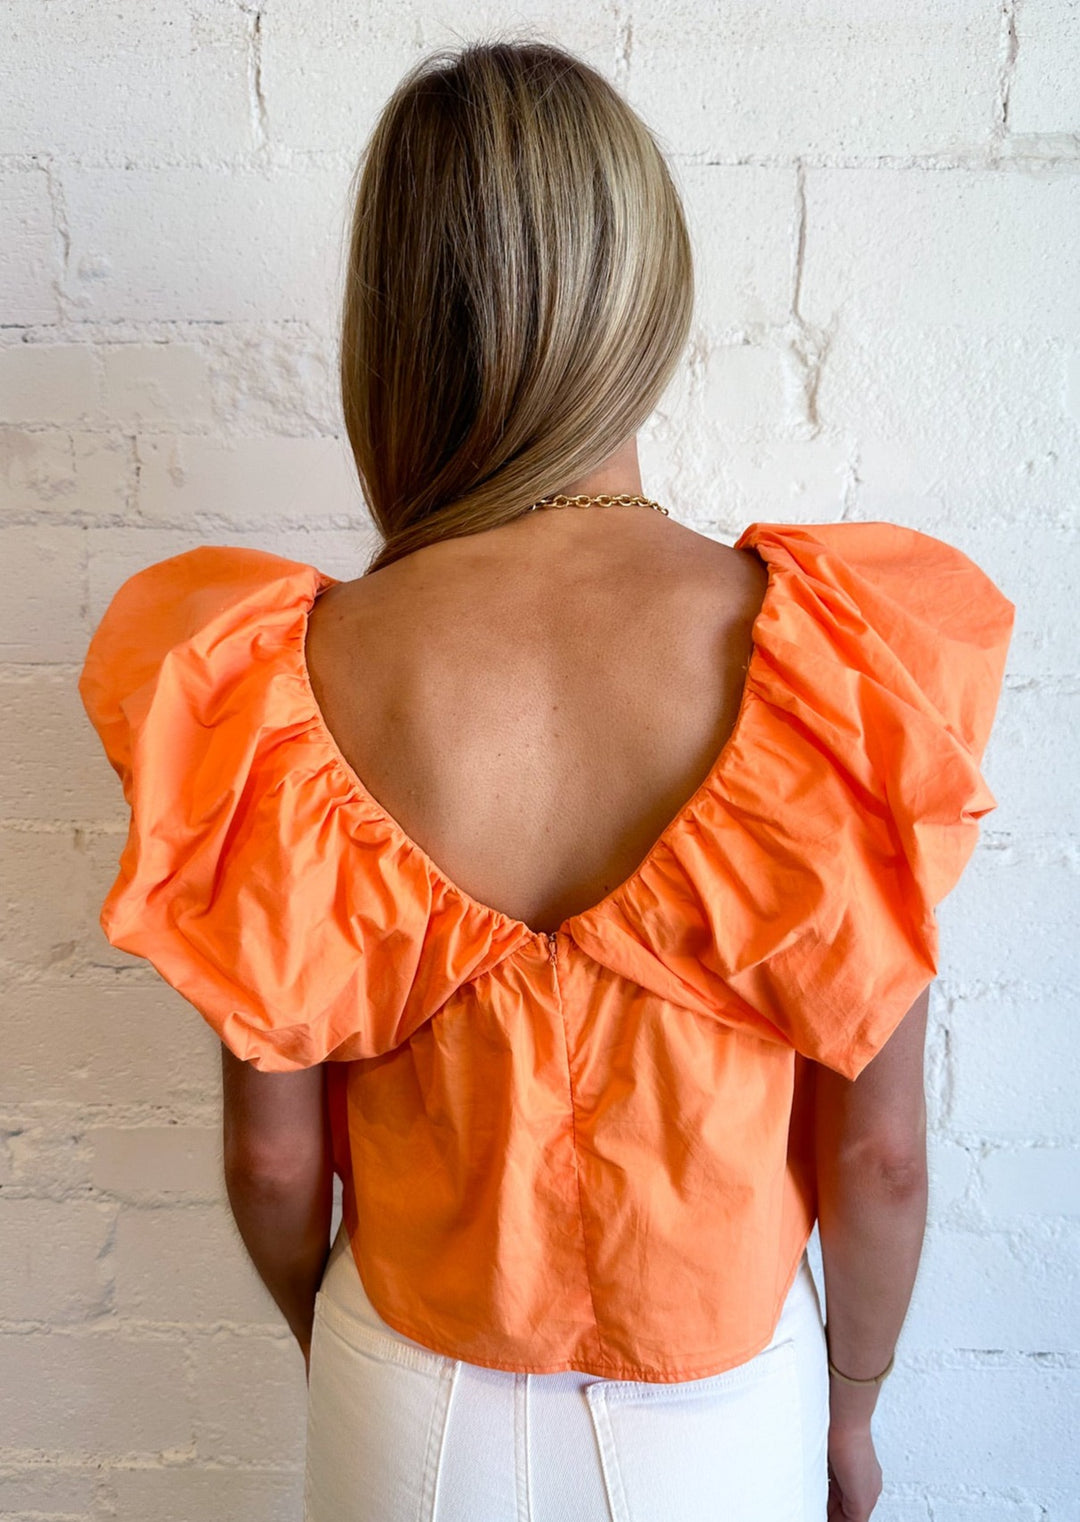 Ella Ruffle Sleeve Top, Tops, Adeline, Adeline, dallas boutique, dallas texas, texas boutique, women's boutique dallas, adeline boutique, dallas boutique, trendy boutique, affordable boutique